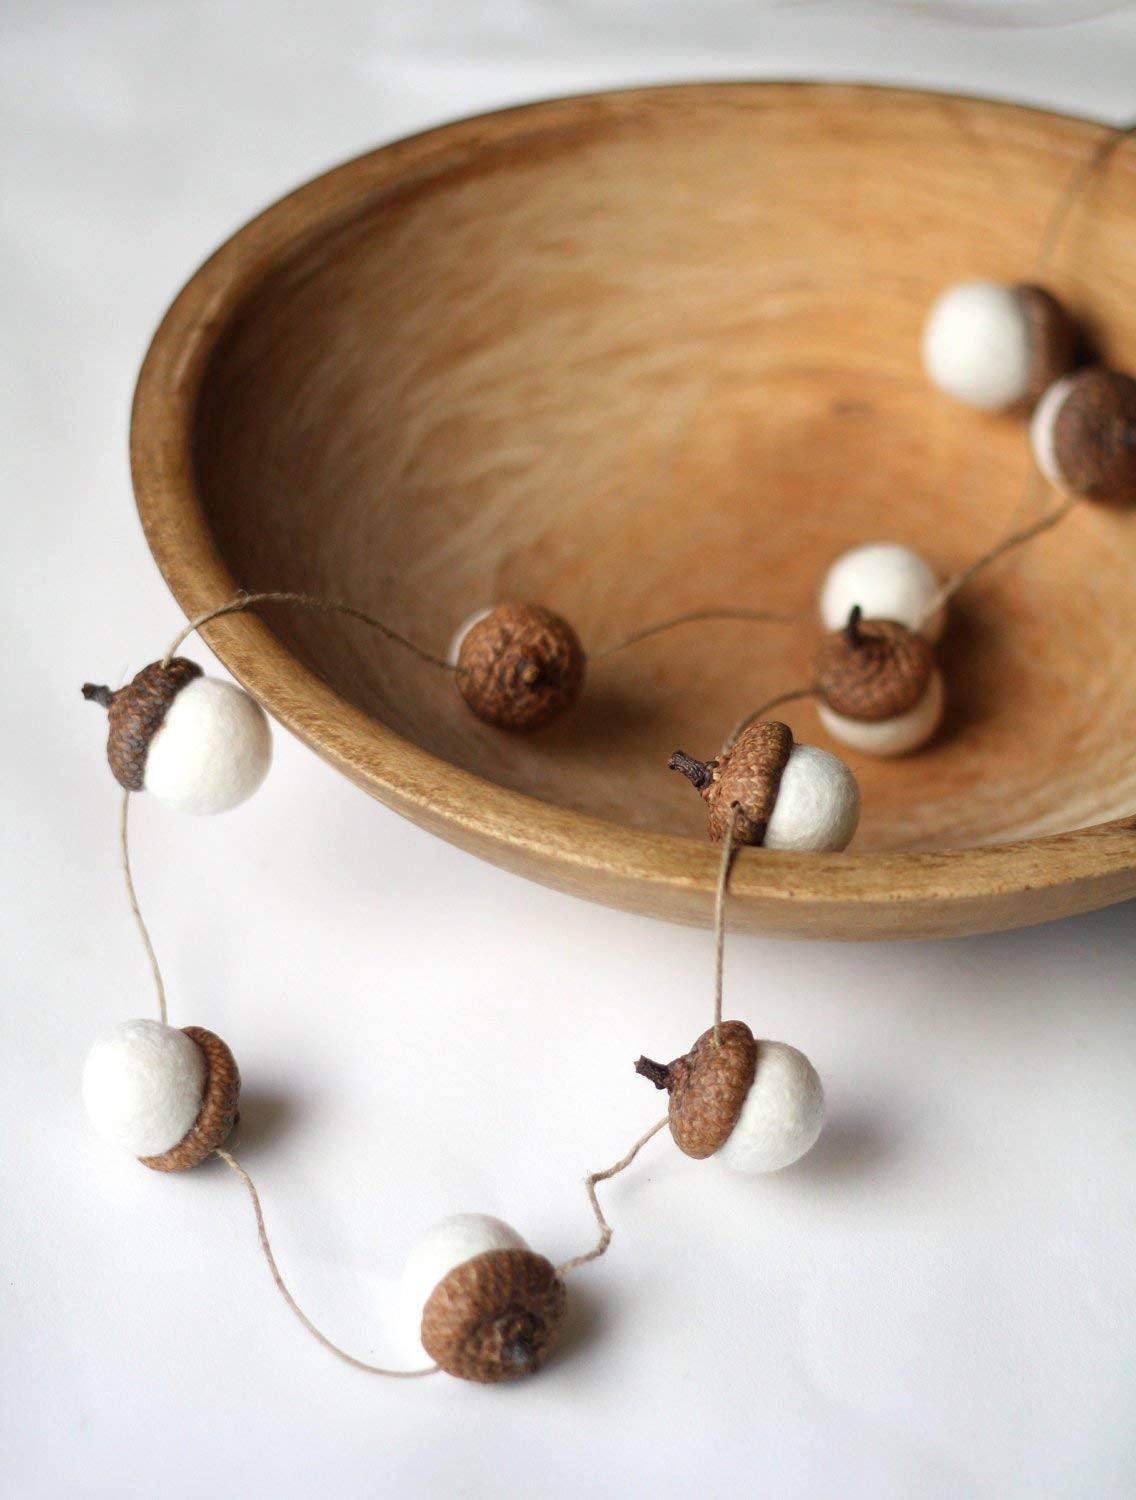 acorn tops with felted bottoms attached with thin twin. inside a bowl.